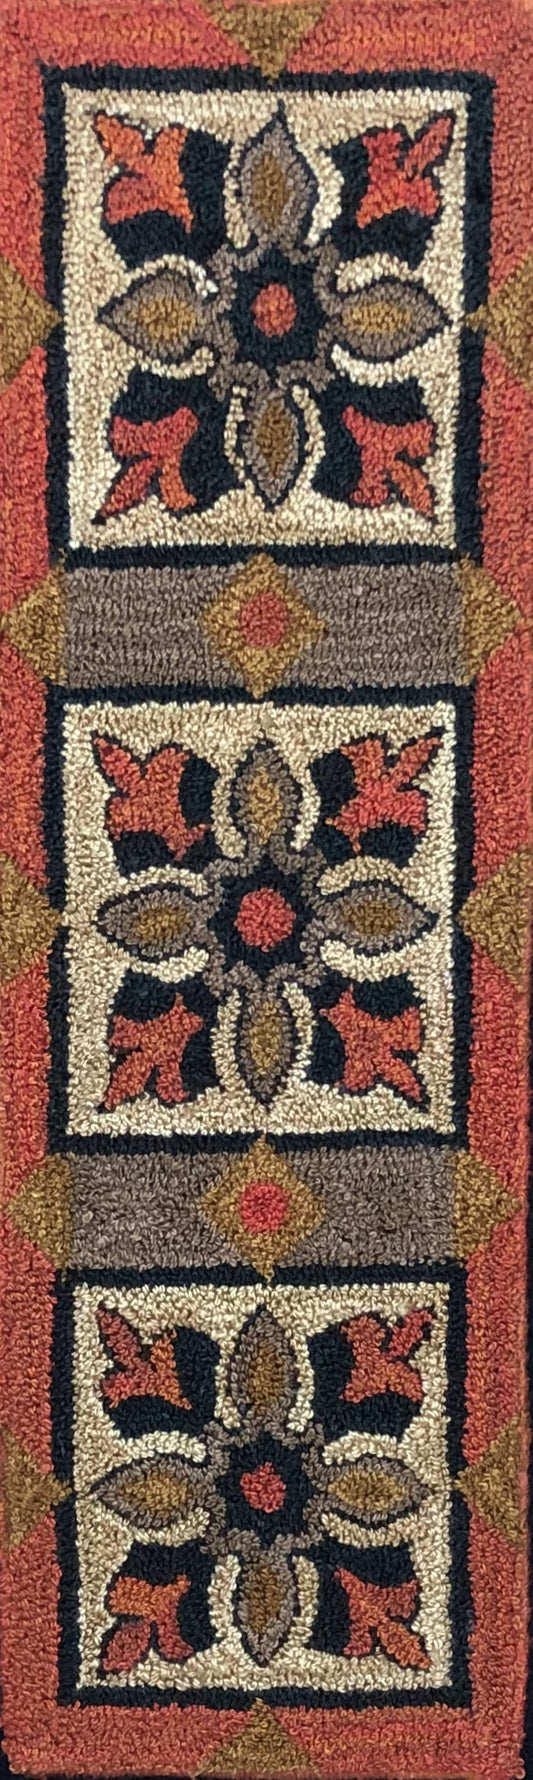 Large Trio- Paper Rug Hooking or Rug Punch Needle Pattern by Orphaned Wool. This pattern makes a wonderful table runner or floor runner rug. Paper Pattern was designed to be enlarged and allows  you to customize the size pattern you want to create.